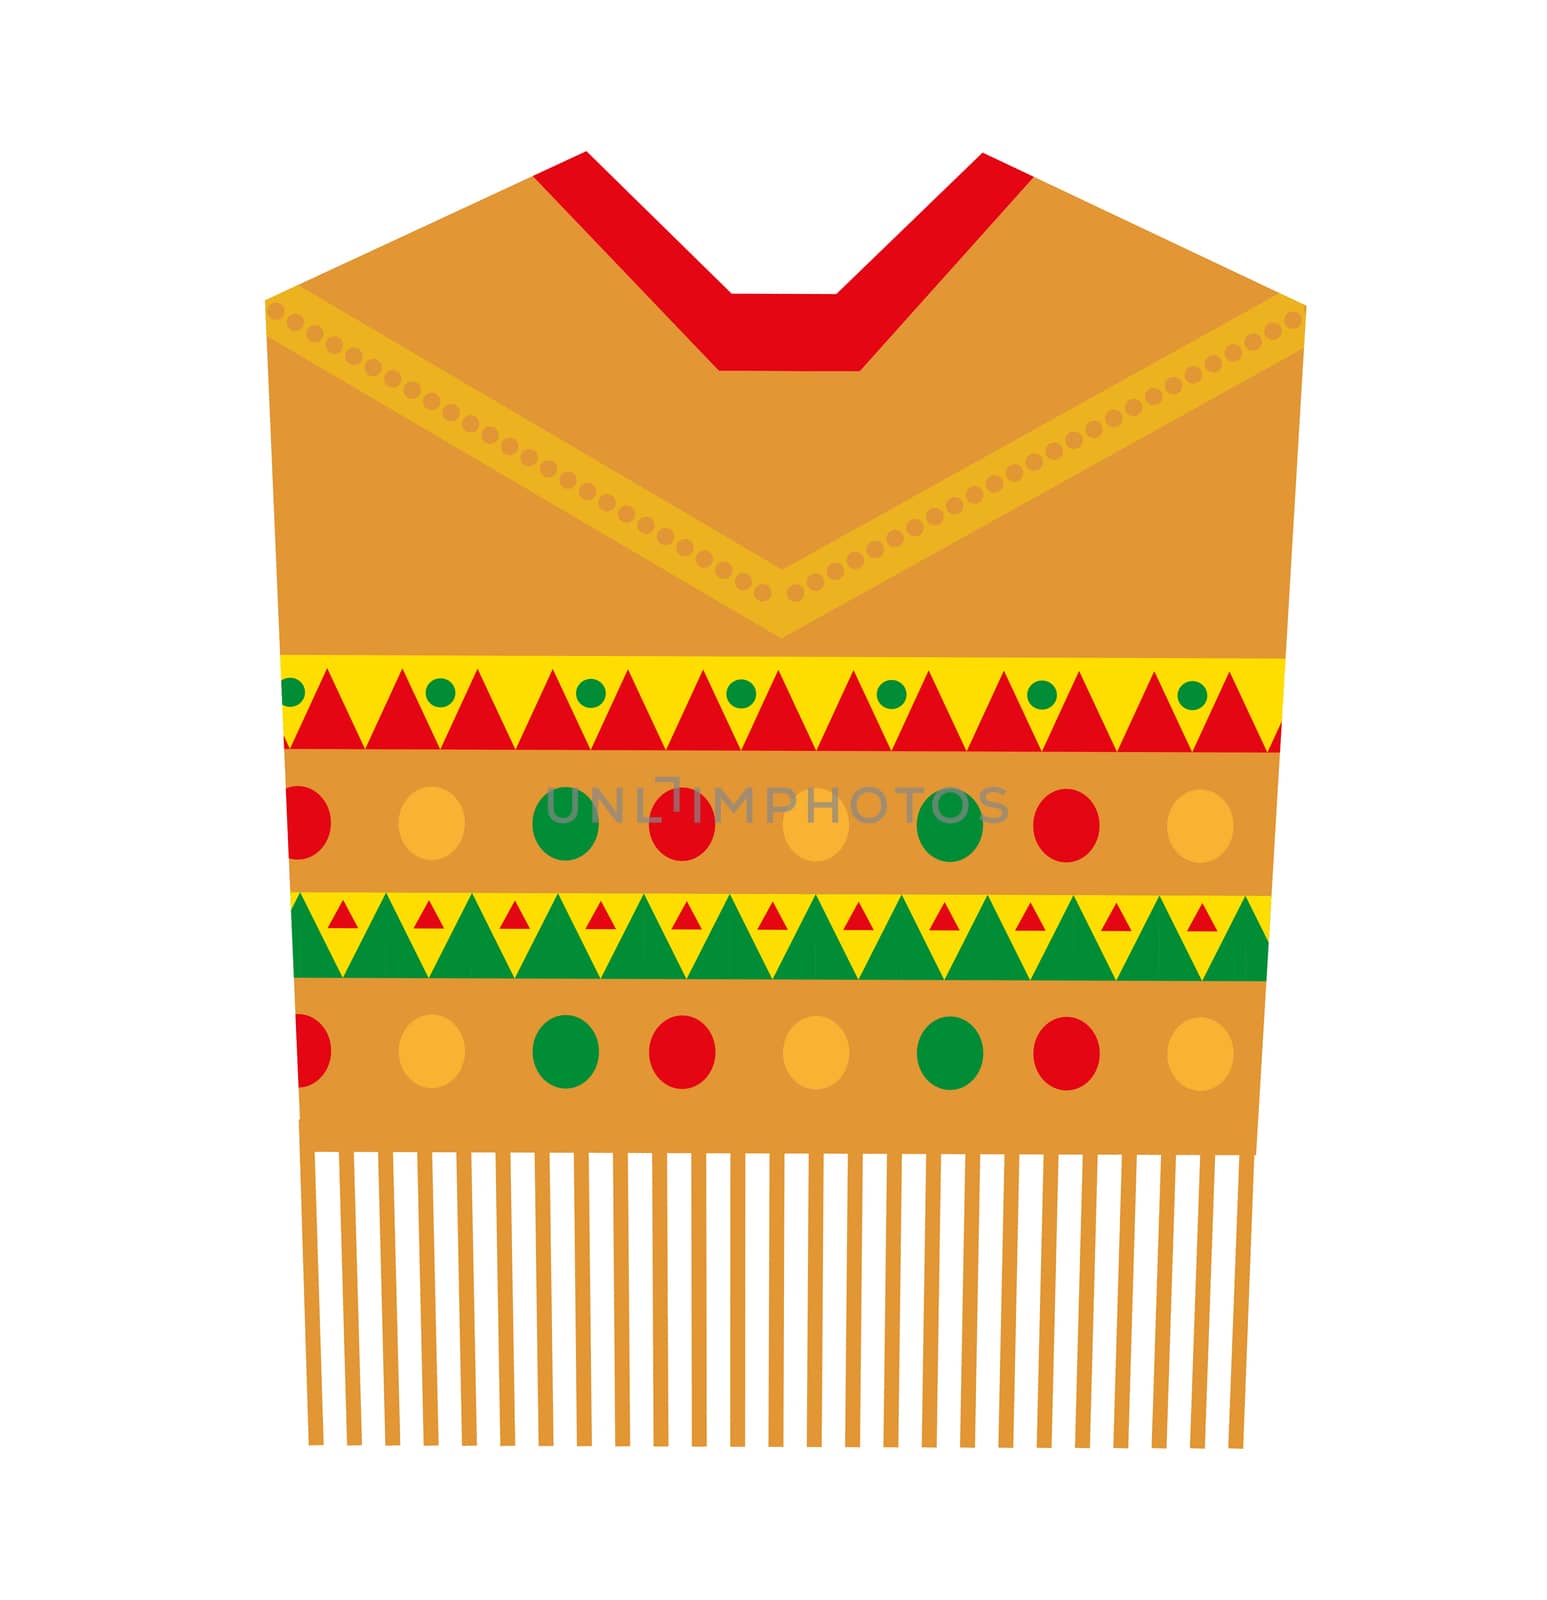 Poncho icon, flat style. Mexican traditional clothing. Isolated on white background. illustration, clip-art. by lucia_fox